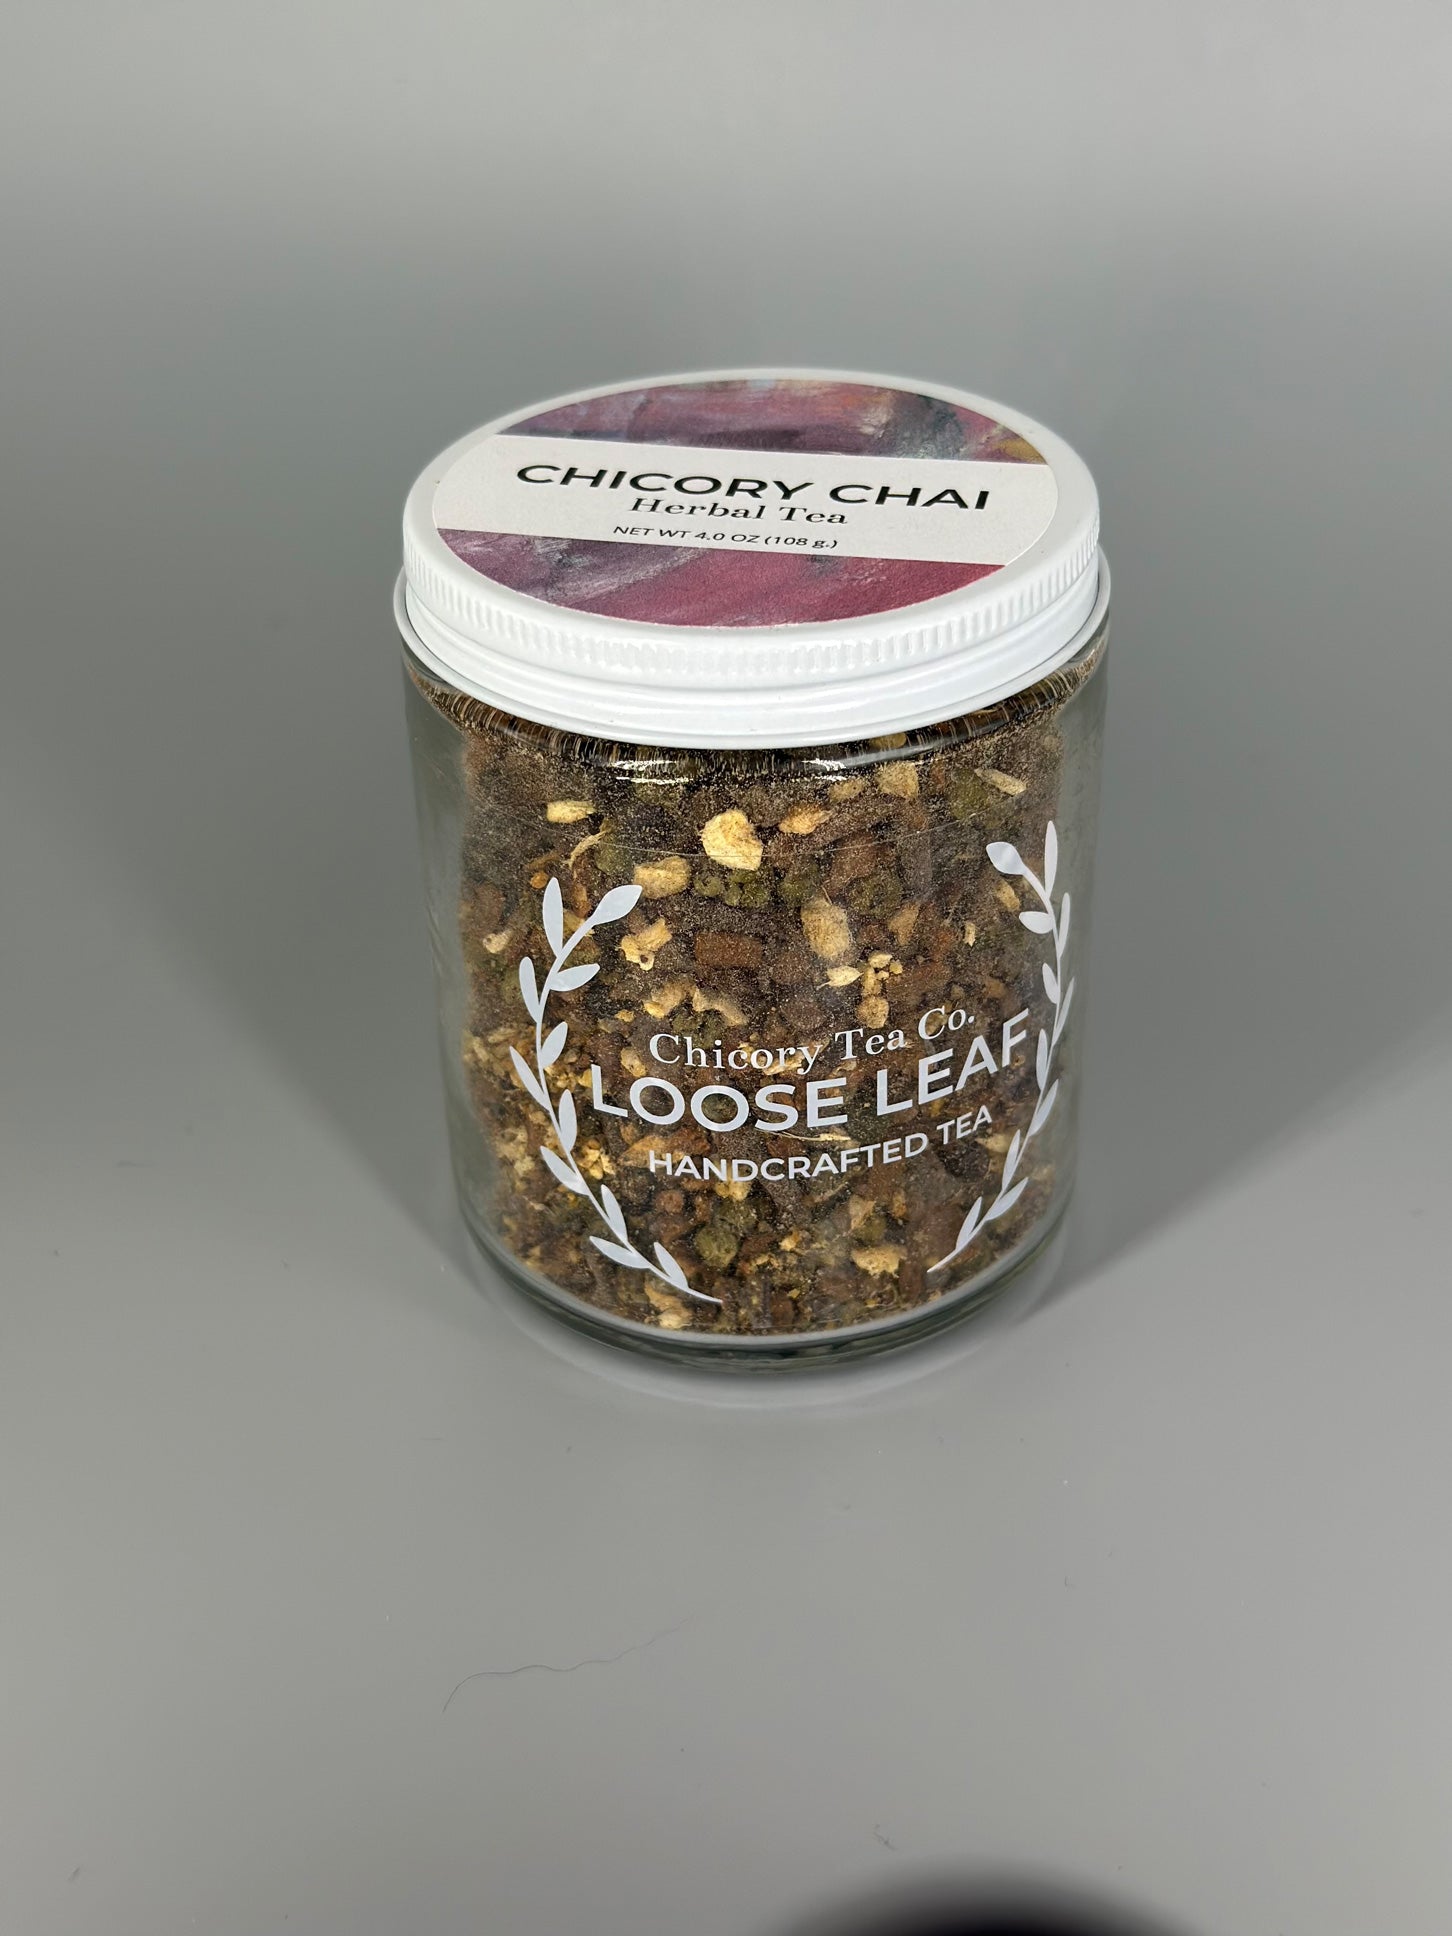 Chicory Tea Co.'s Chicory Chai Herbal Tea in the jar, view from the front